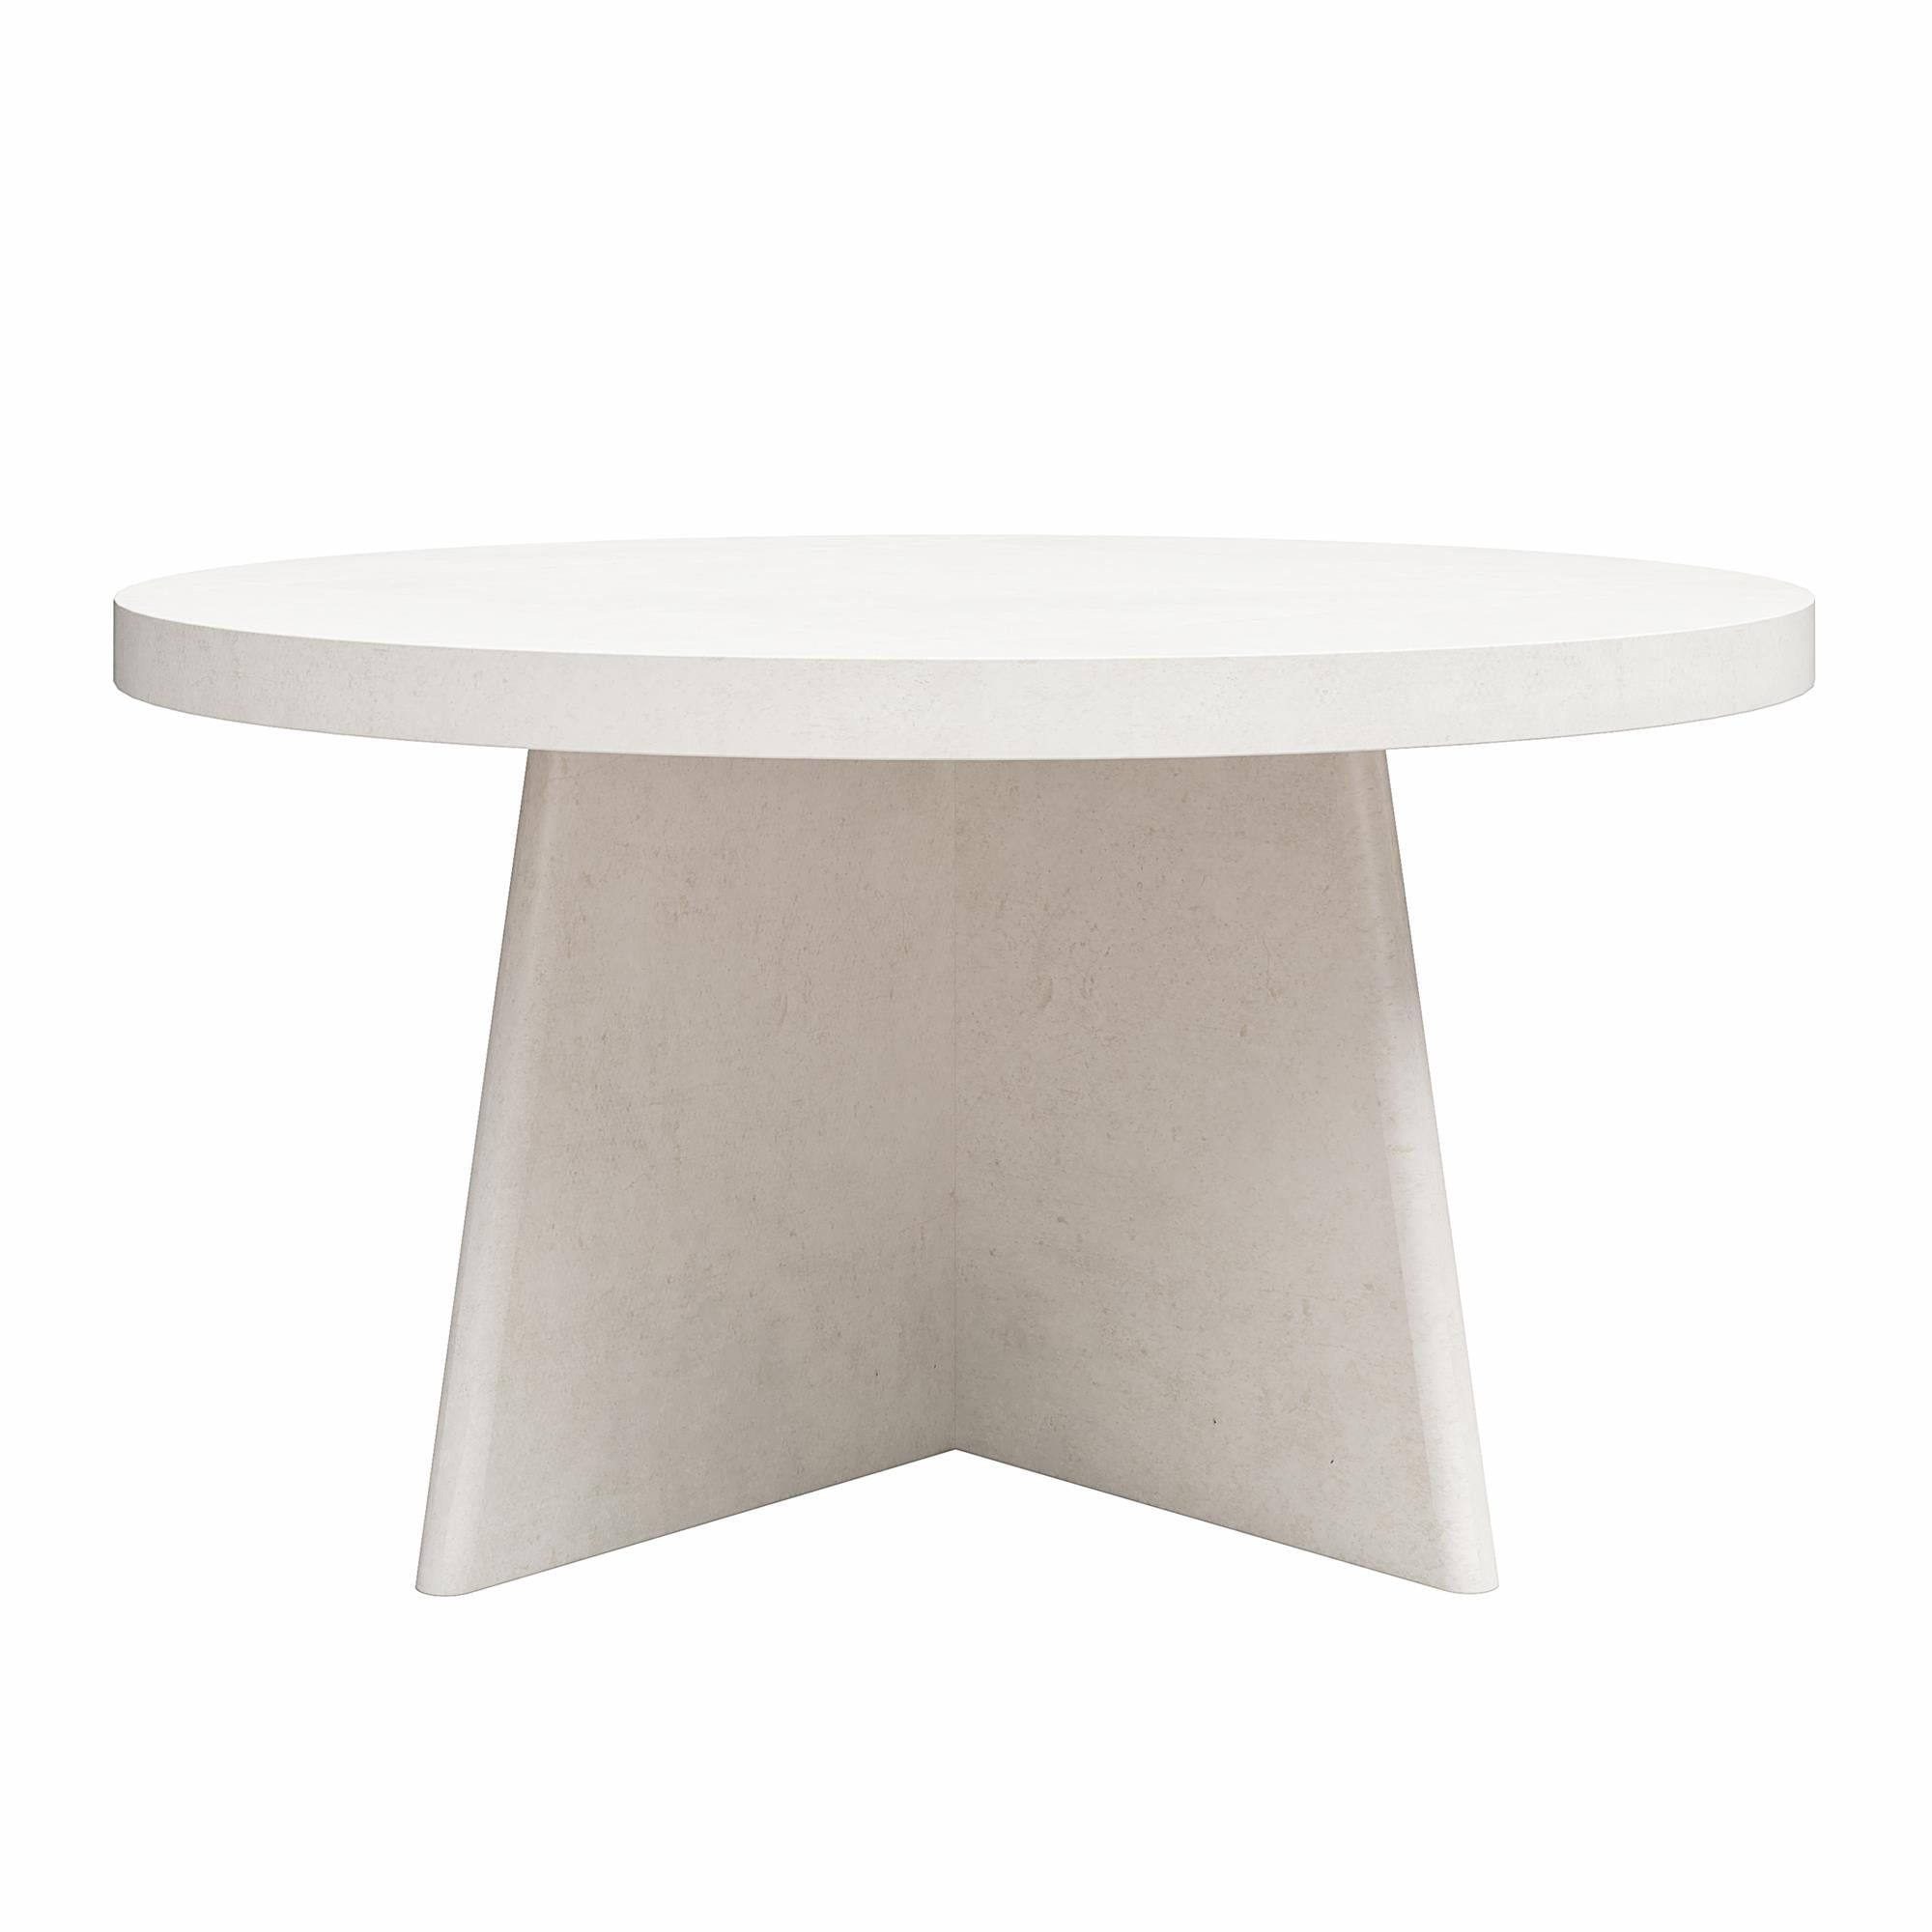 Queer Eye Liam Round Coffee Table, Plaster – Walmart Pertaining To Liam Round Plaster Coffee Tables (View 10 of 15)